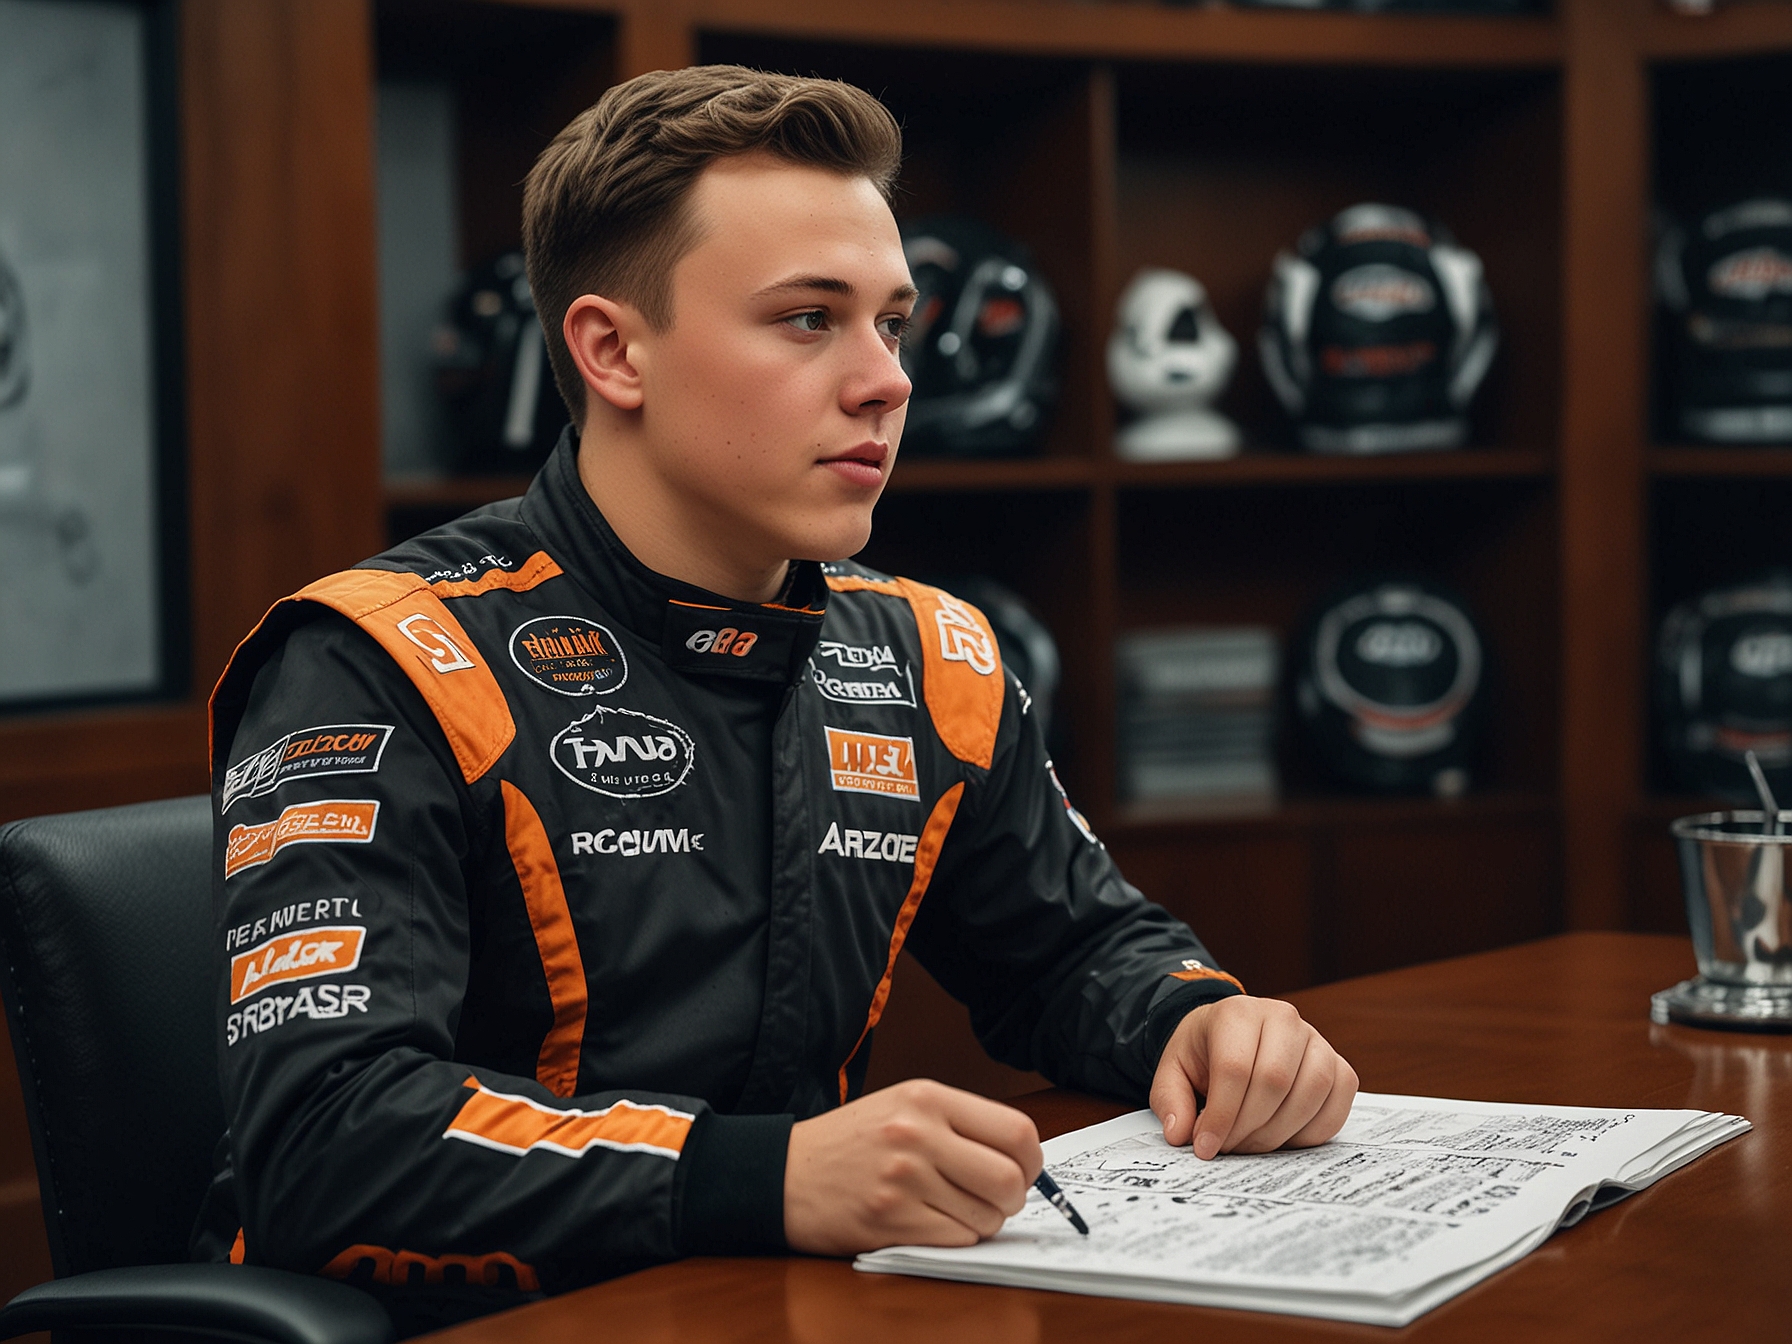 Christopher Bell during a media interview, where he mistakenly hints at Chase Briscoe's possible move to Joe Gibbs Racing, sparking widespread discussions and rumors.